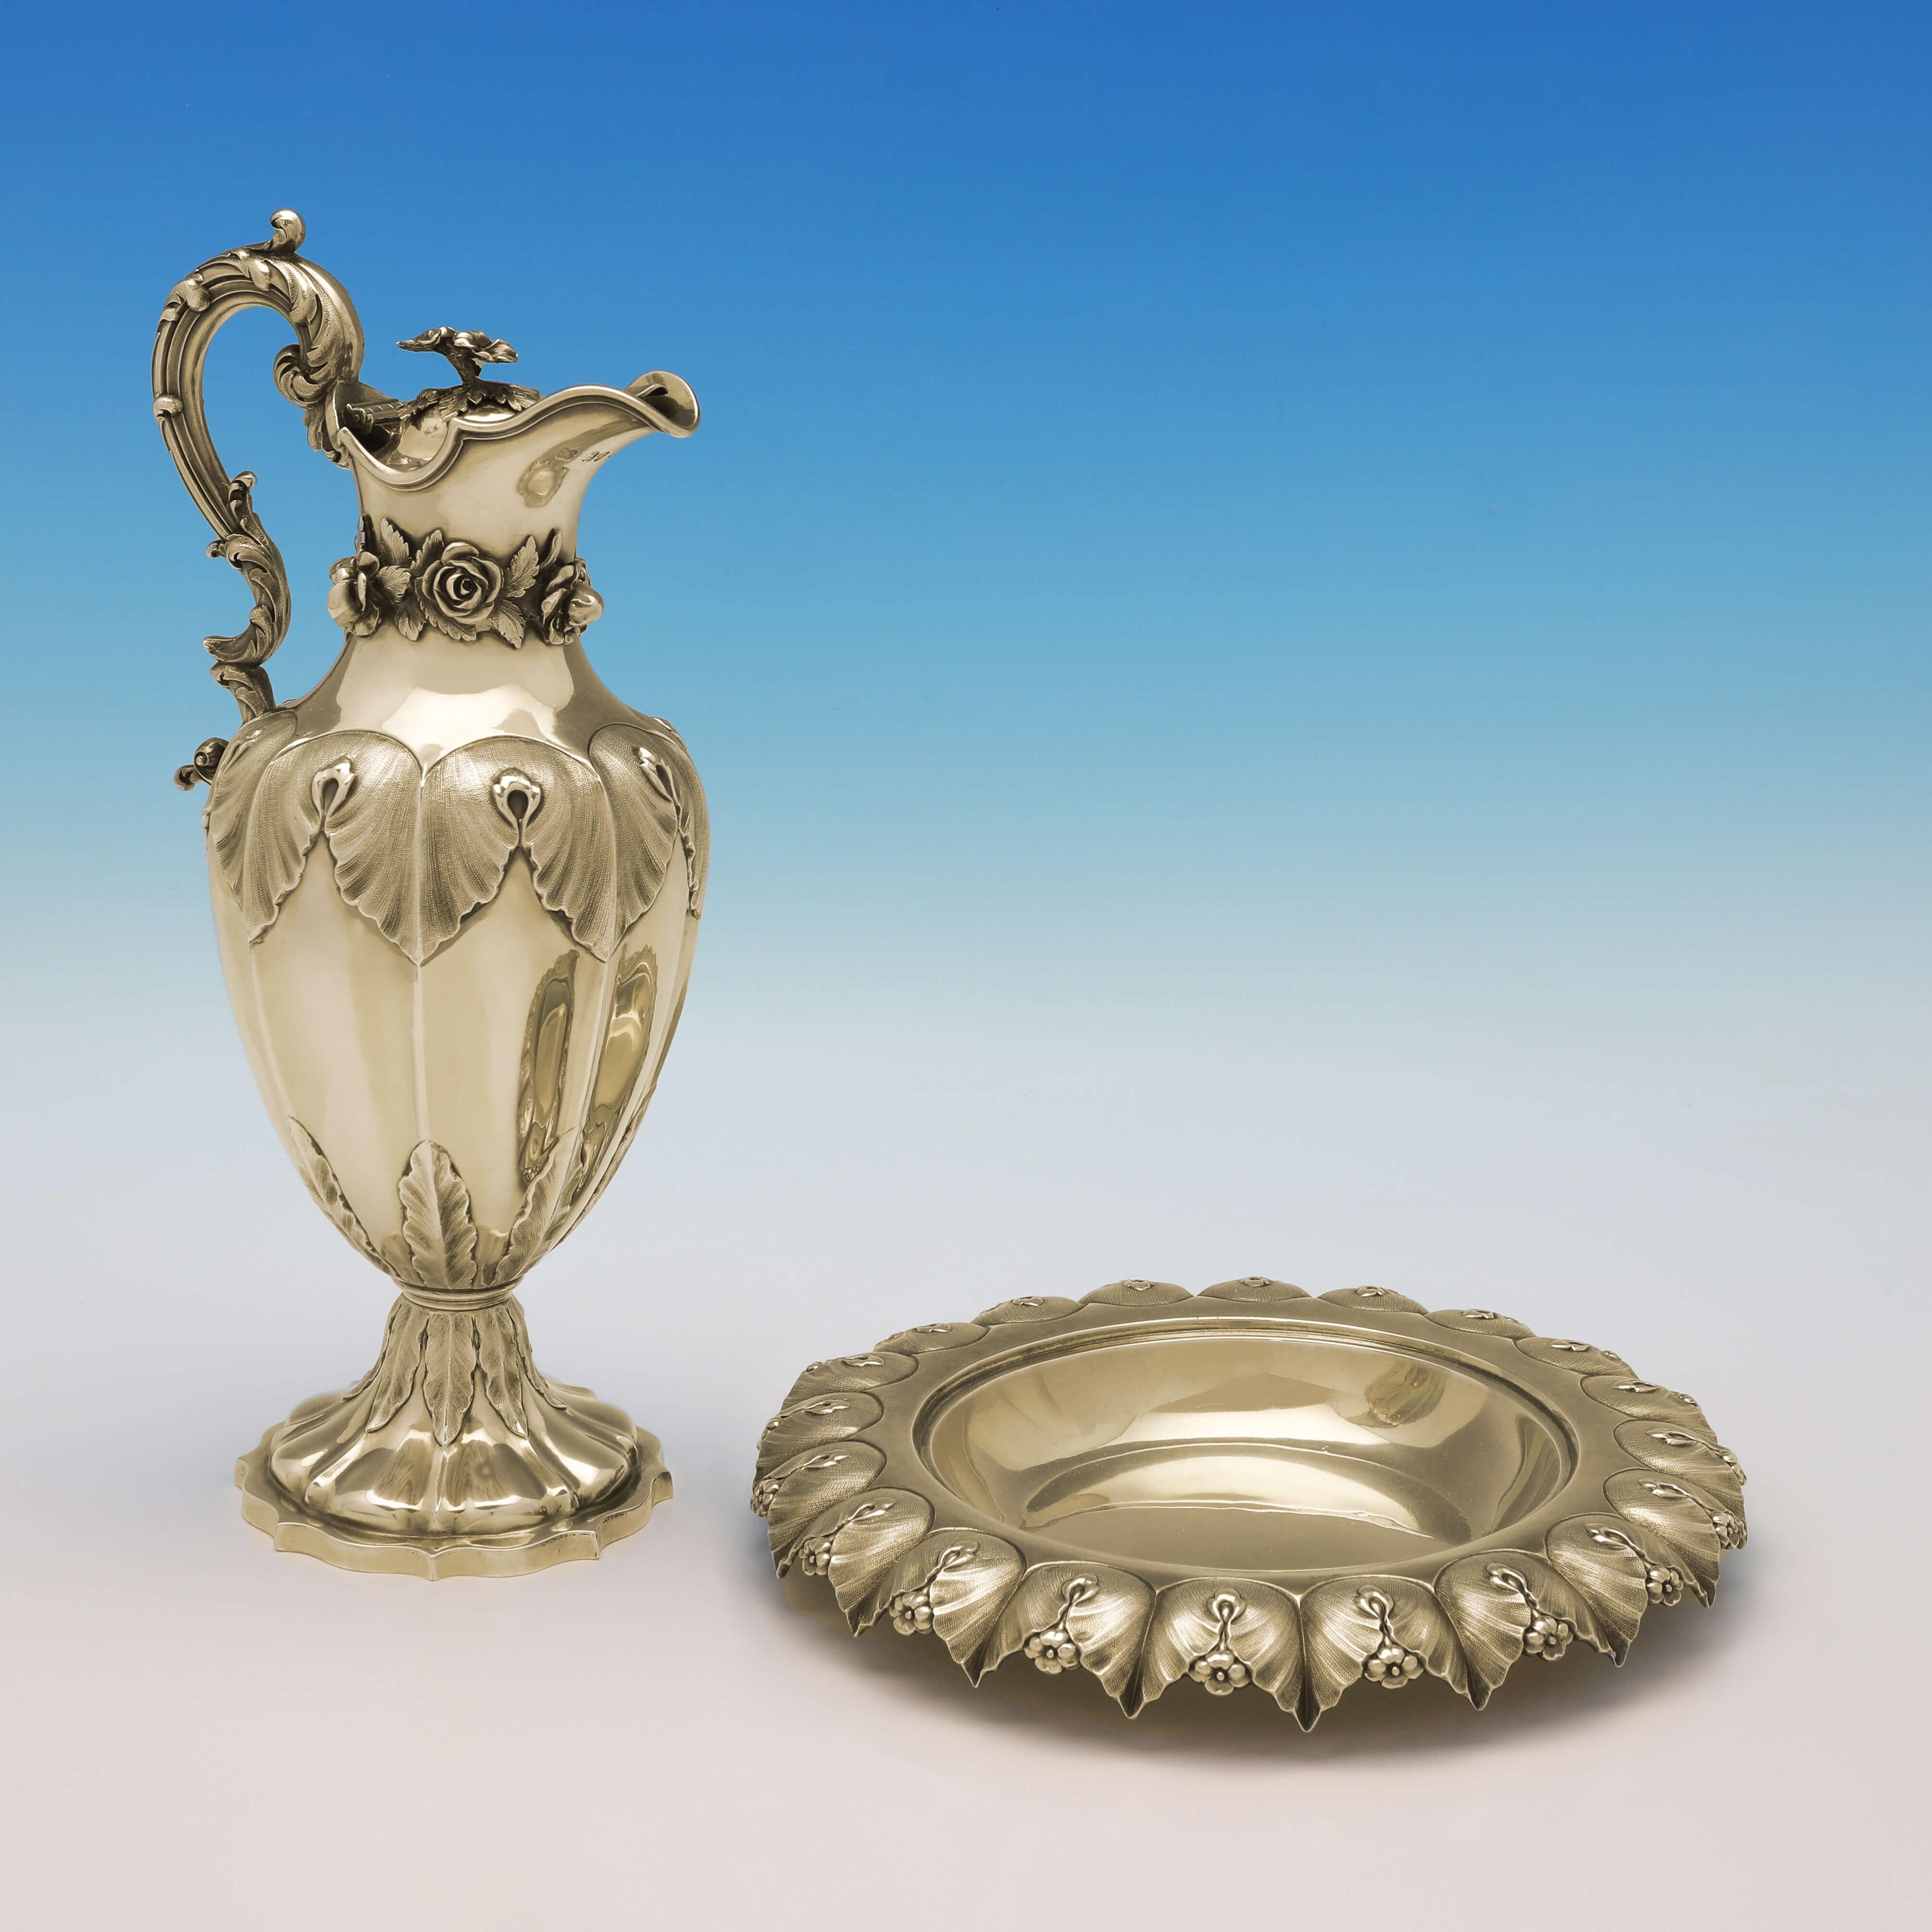 Hallmarked in London in 1830 & 1836 by Barnards, this stunning, Antique Sterling Silver Wine Ewer on Stand, features chased acanthus and rose detailing, cast and applied roses around the spout of the jug, an ornate handle, and the original gilding.